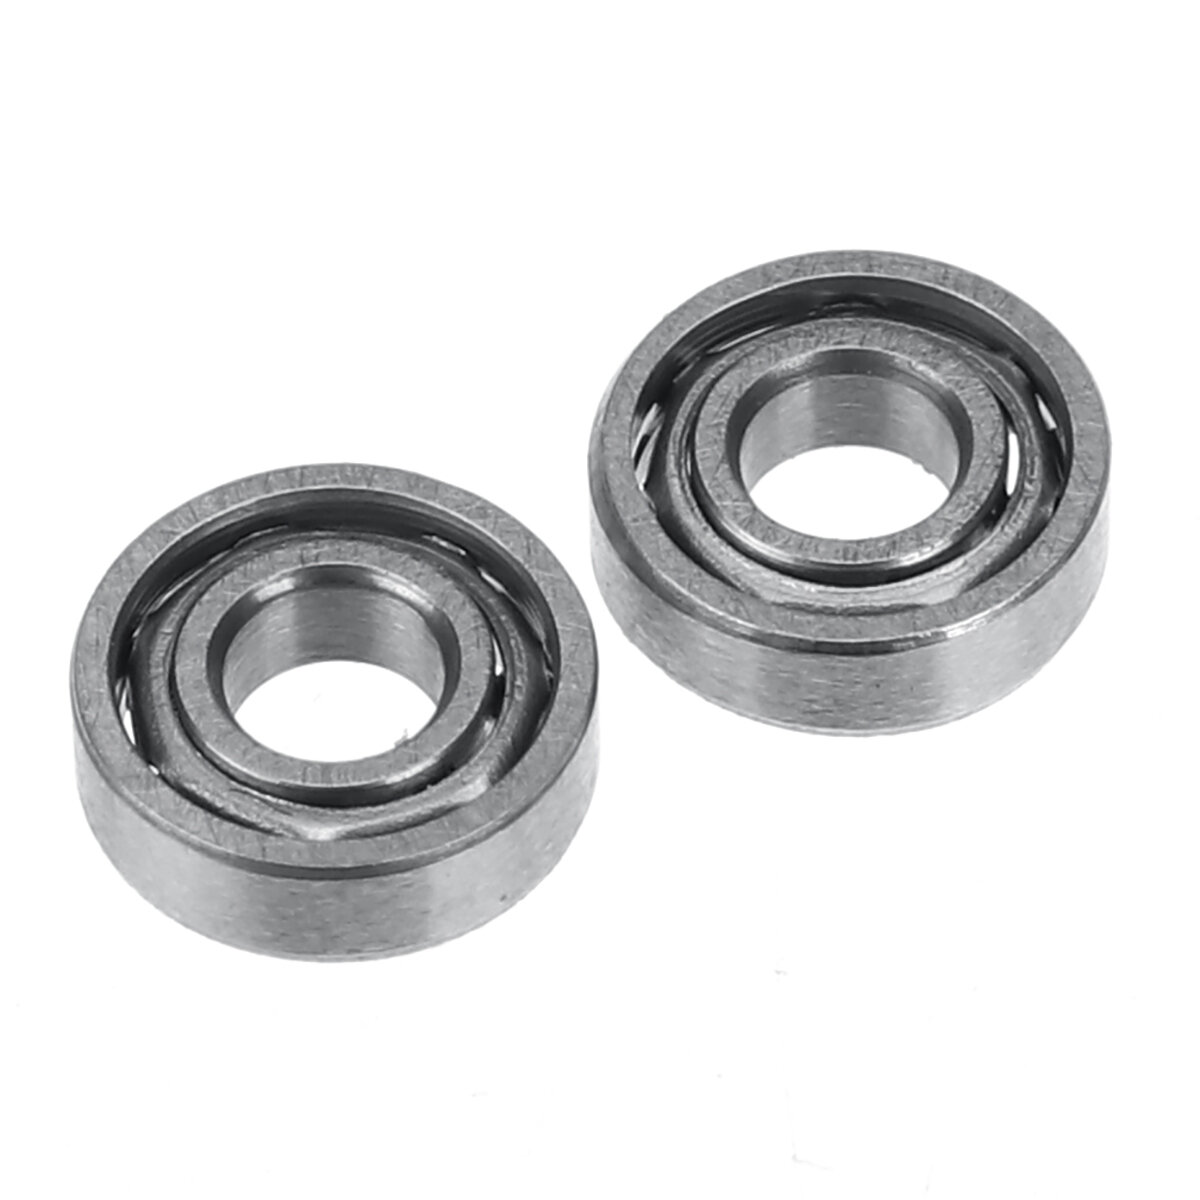 Eachine E110 Bearing Set RC Helicopter Parts